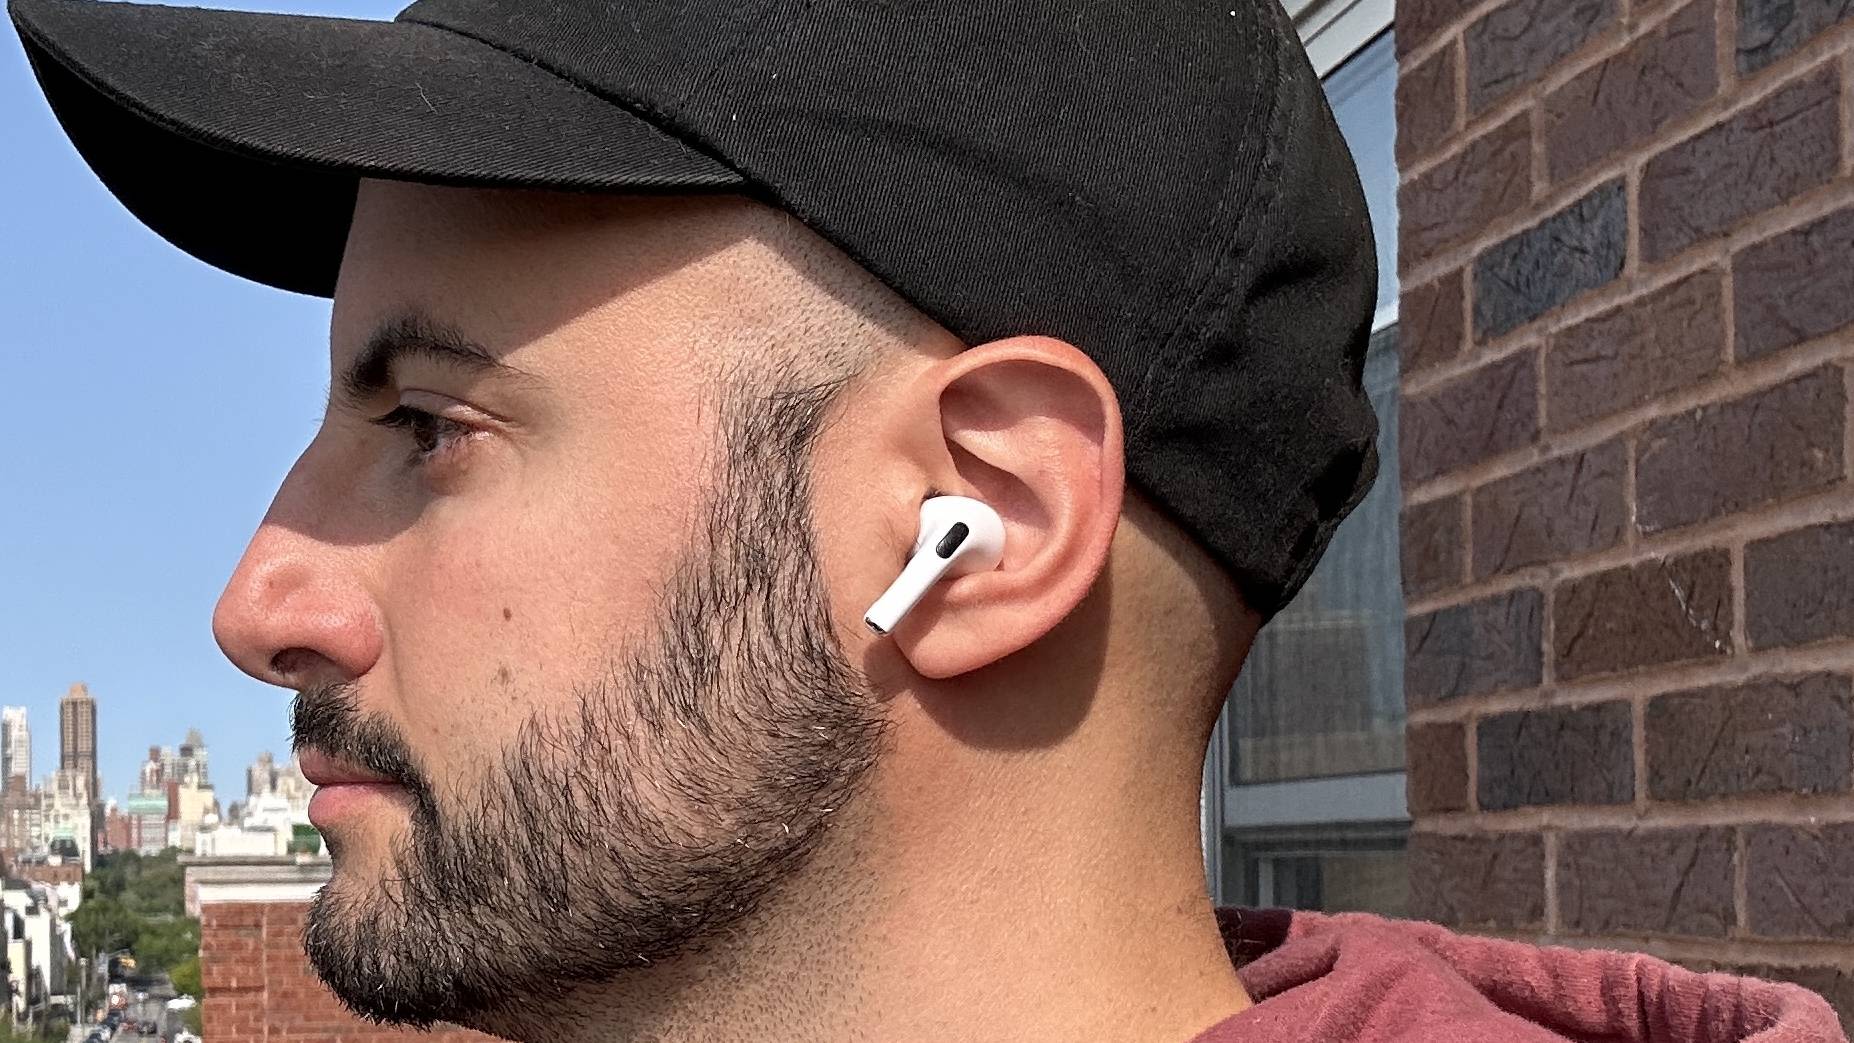 Apple AirPods Review (2021): The Buds Are Not for You